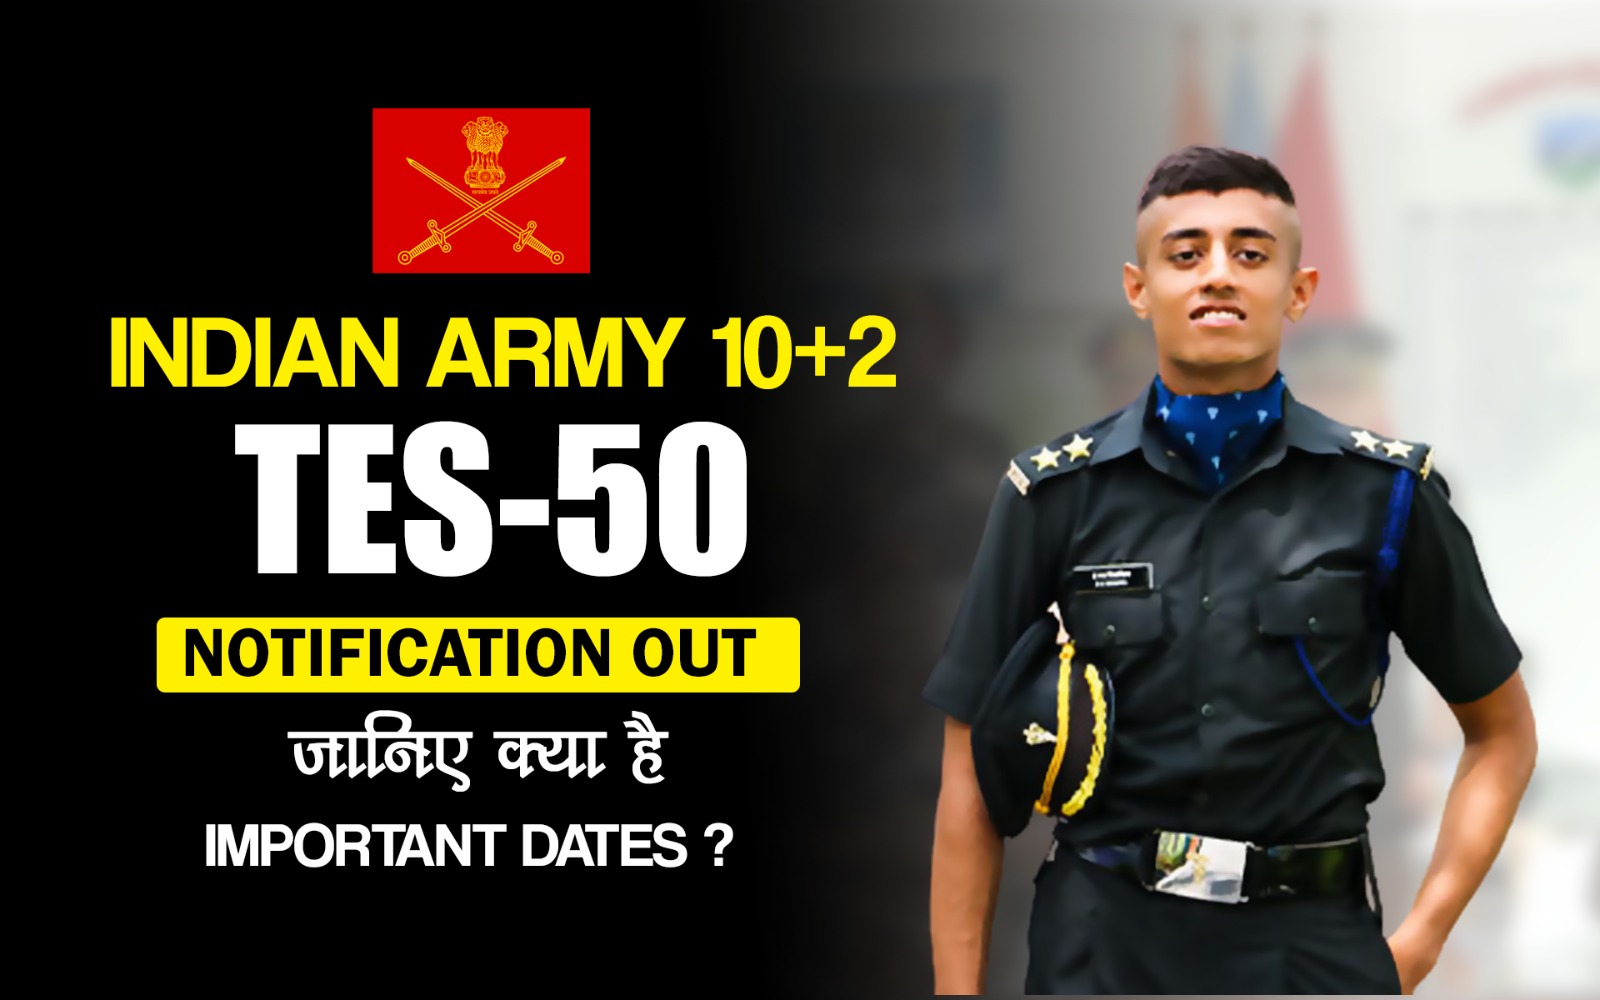 army 10+2 tes 50 notification